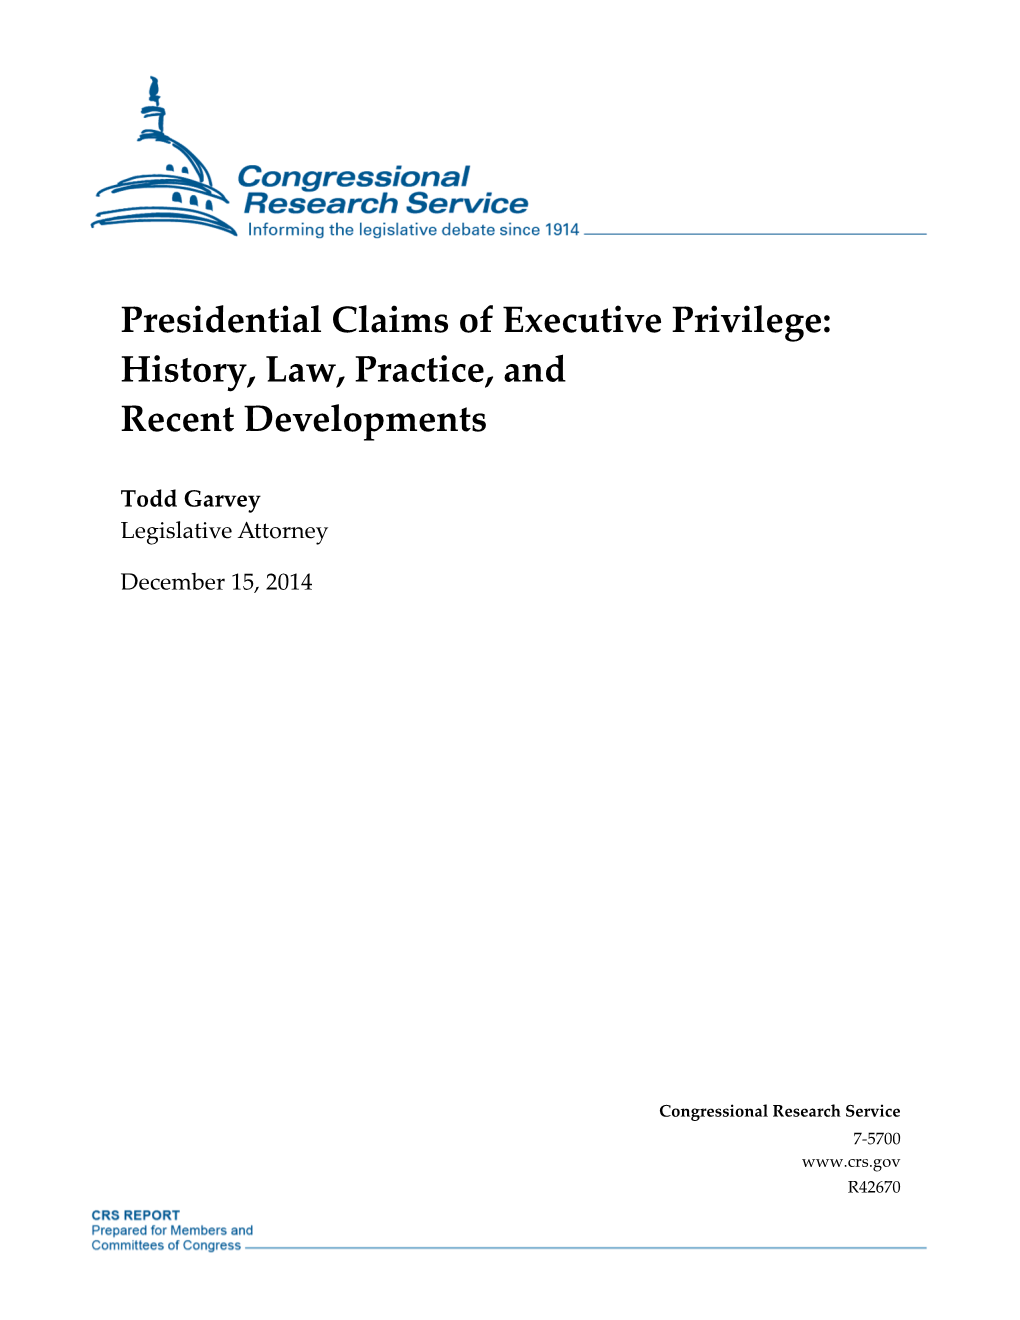 Presidential Claims of Executive Privilege: History, Law, Practice, and Recent Developments